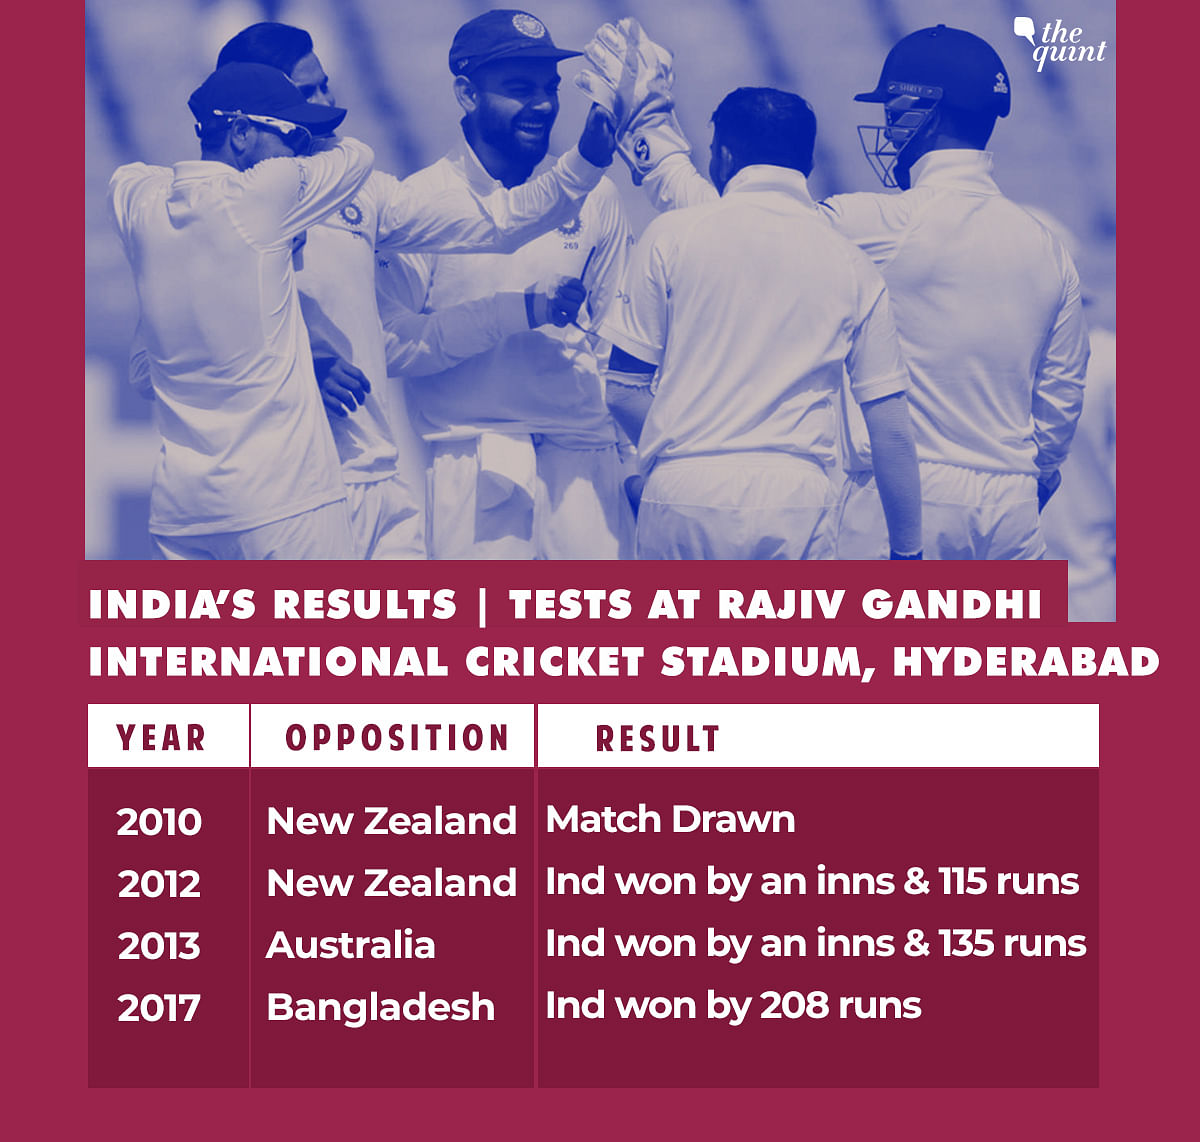 West Indies’ recent results in India make for dismal reading. Will they be able to force the Test into the 4th day?